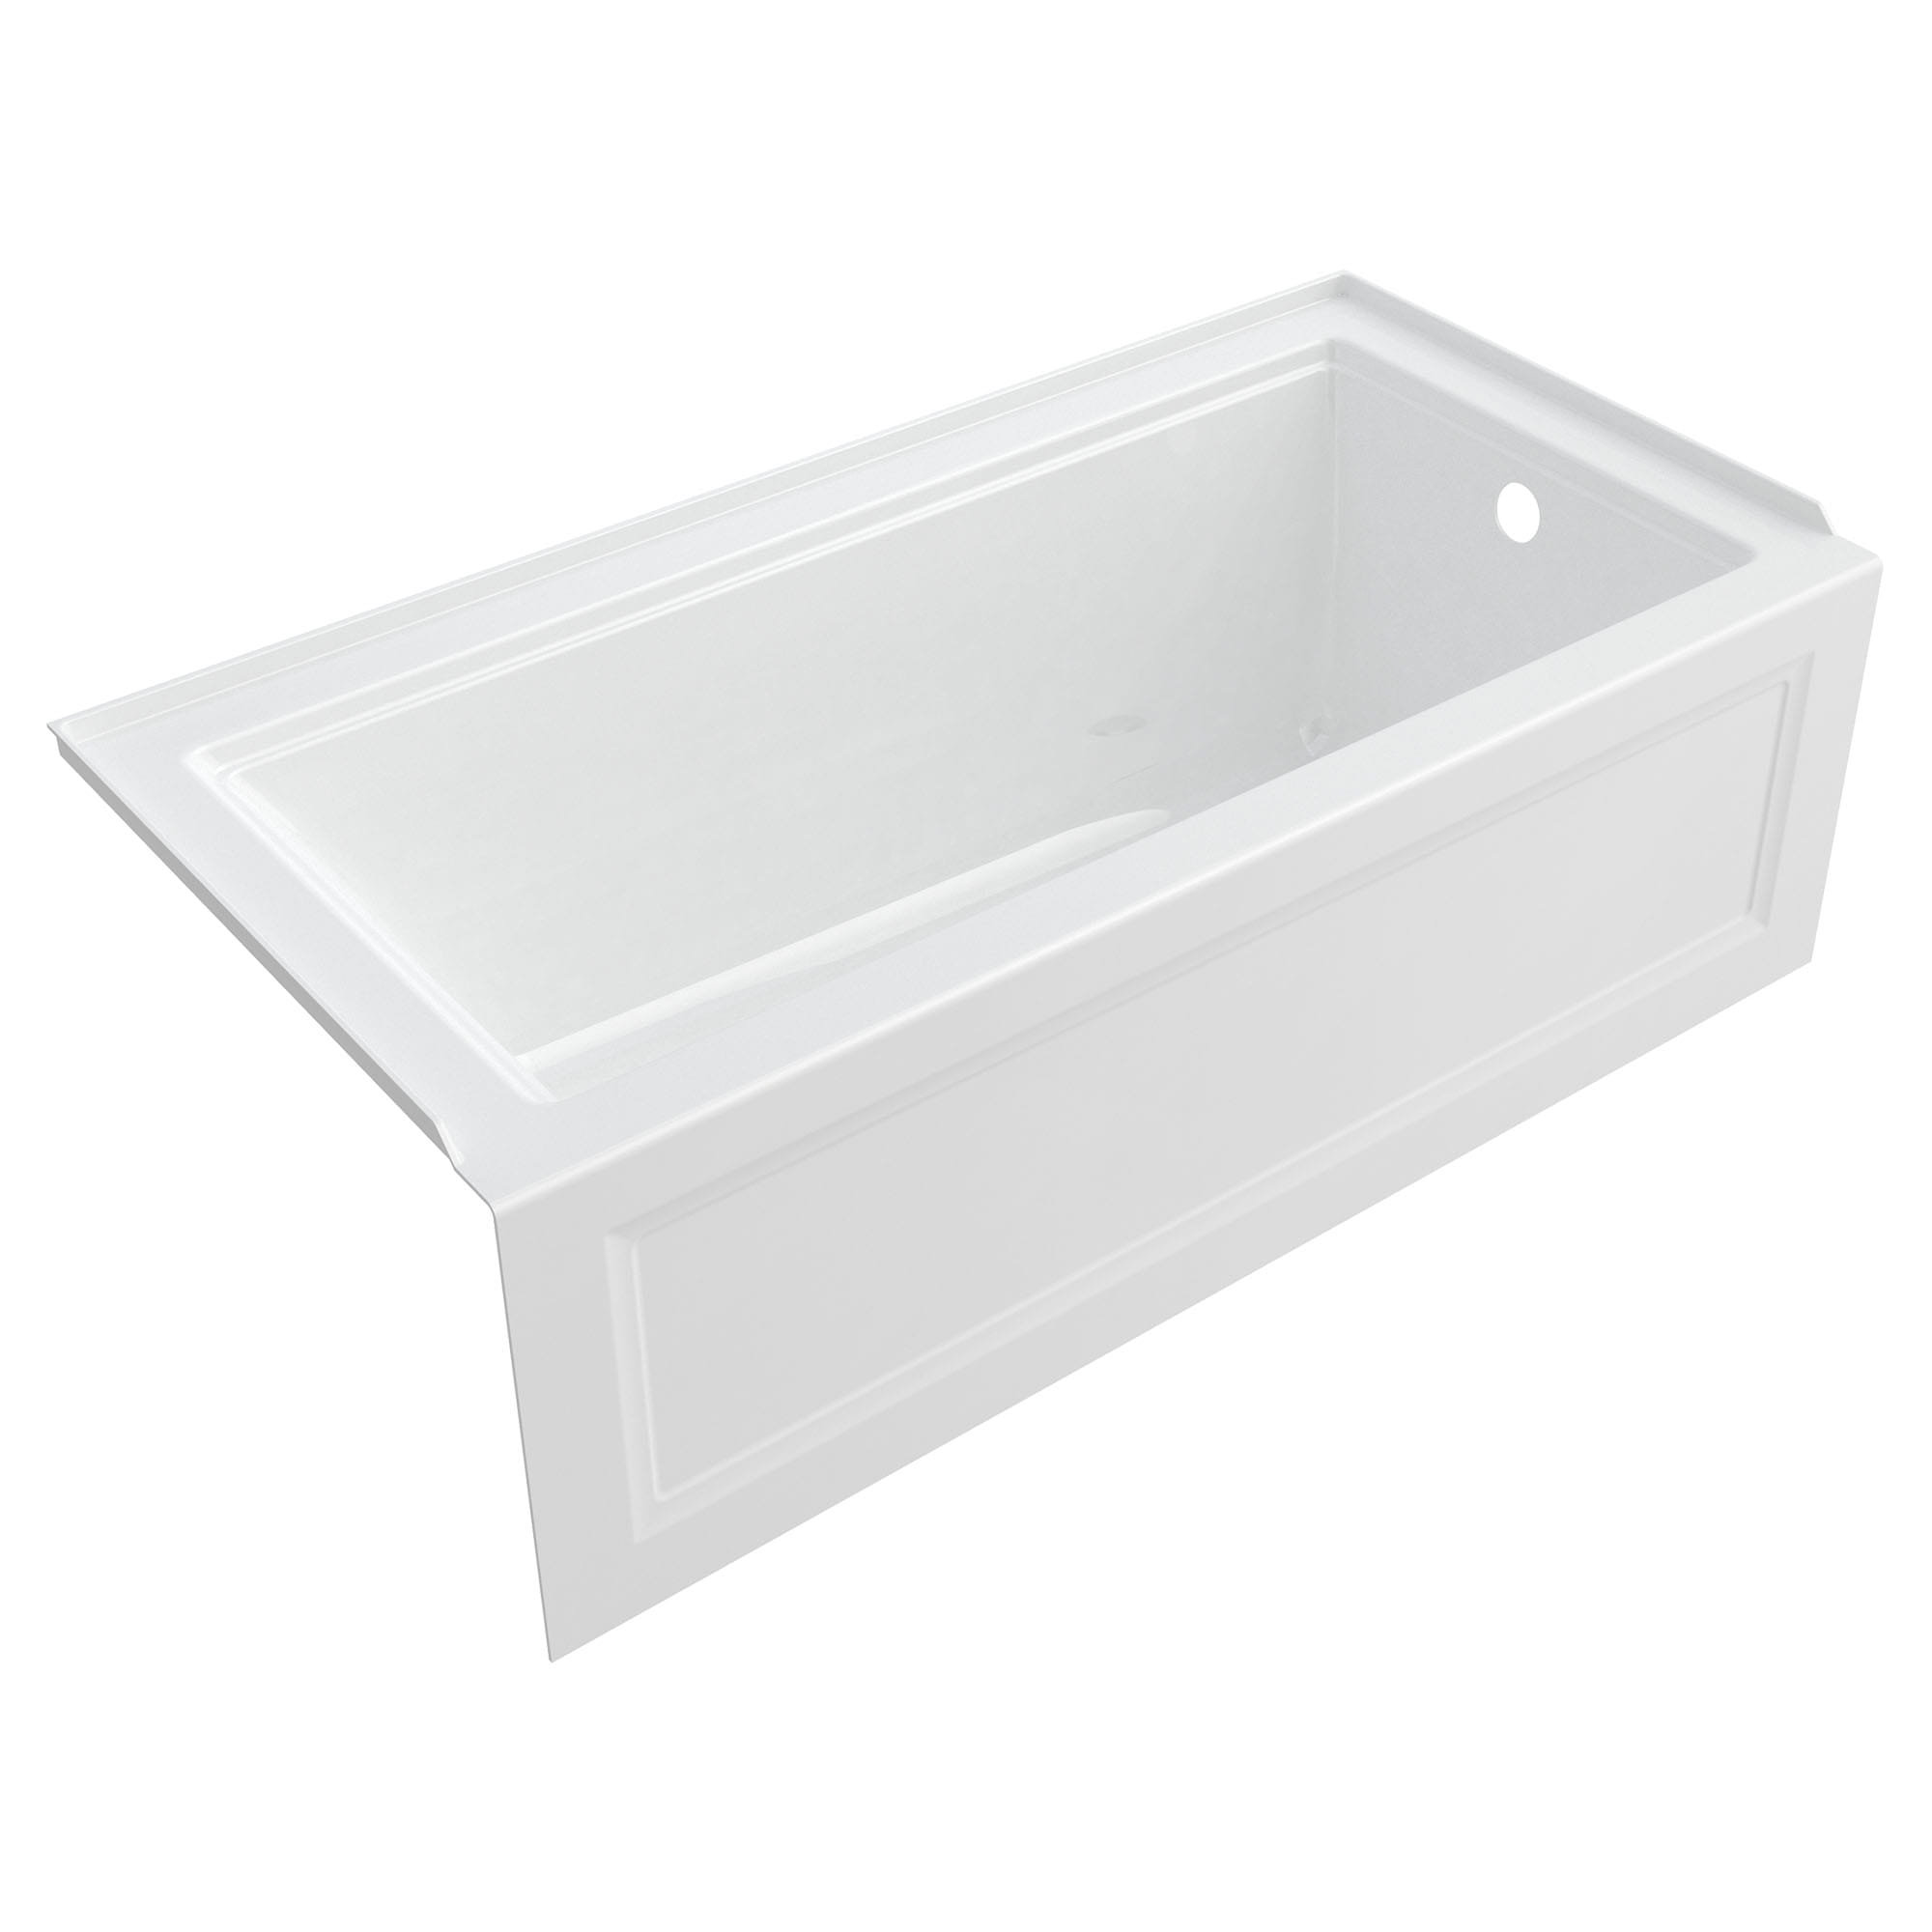 Town Square S 60 x 30 Inch Integral Apron Bathtub With Right Hand Outlet WHITE